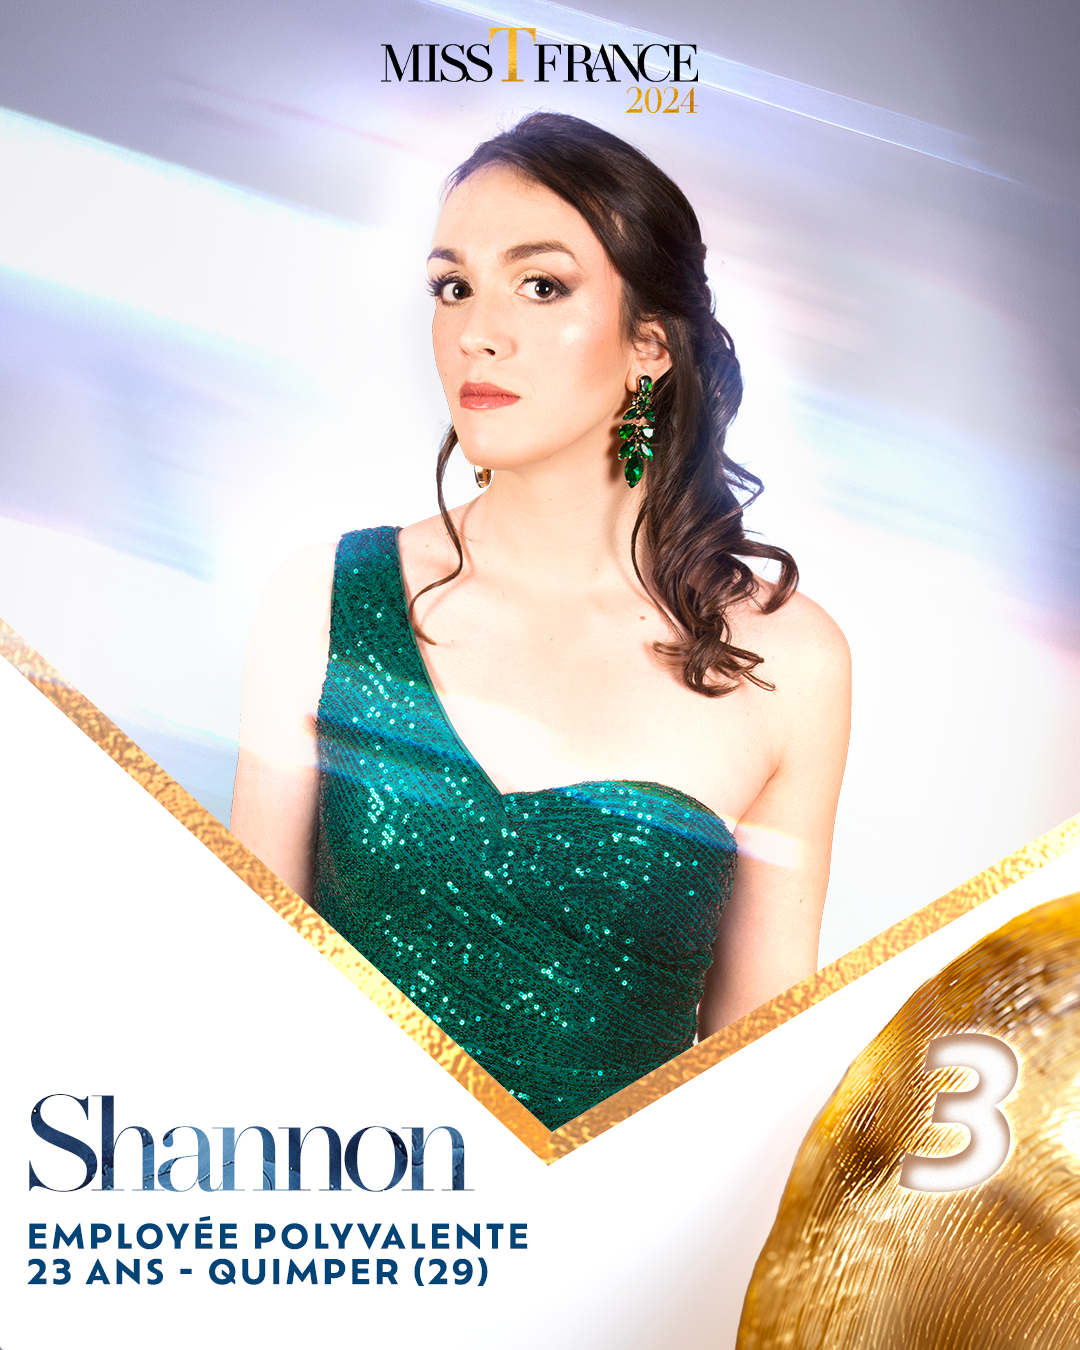 Shannon - Candidate n°3